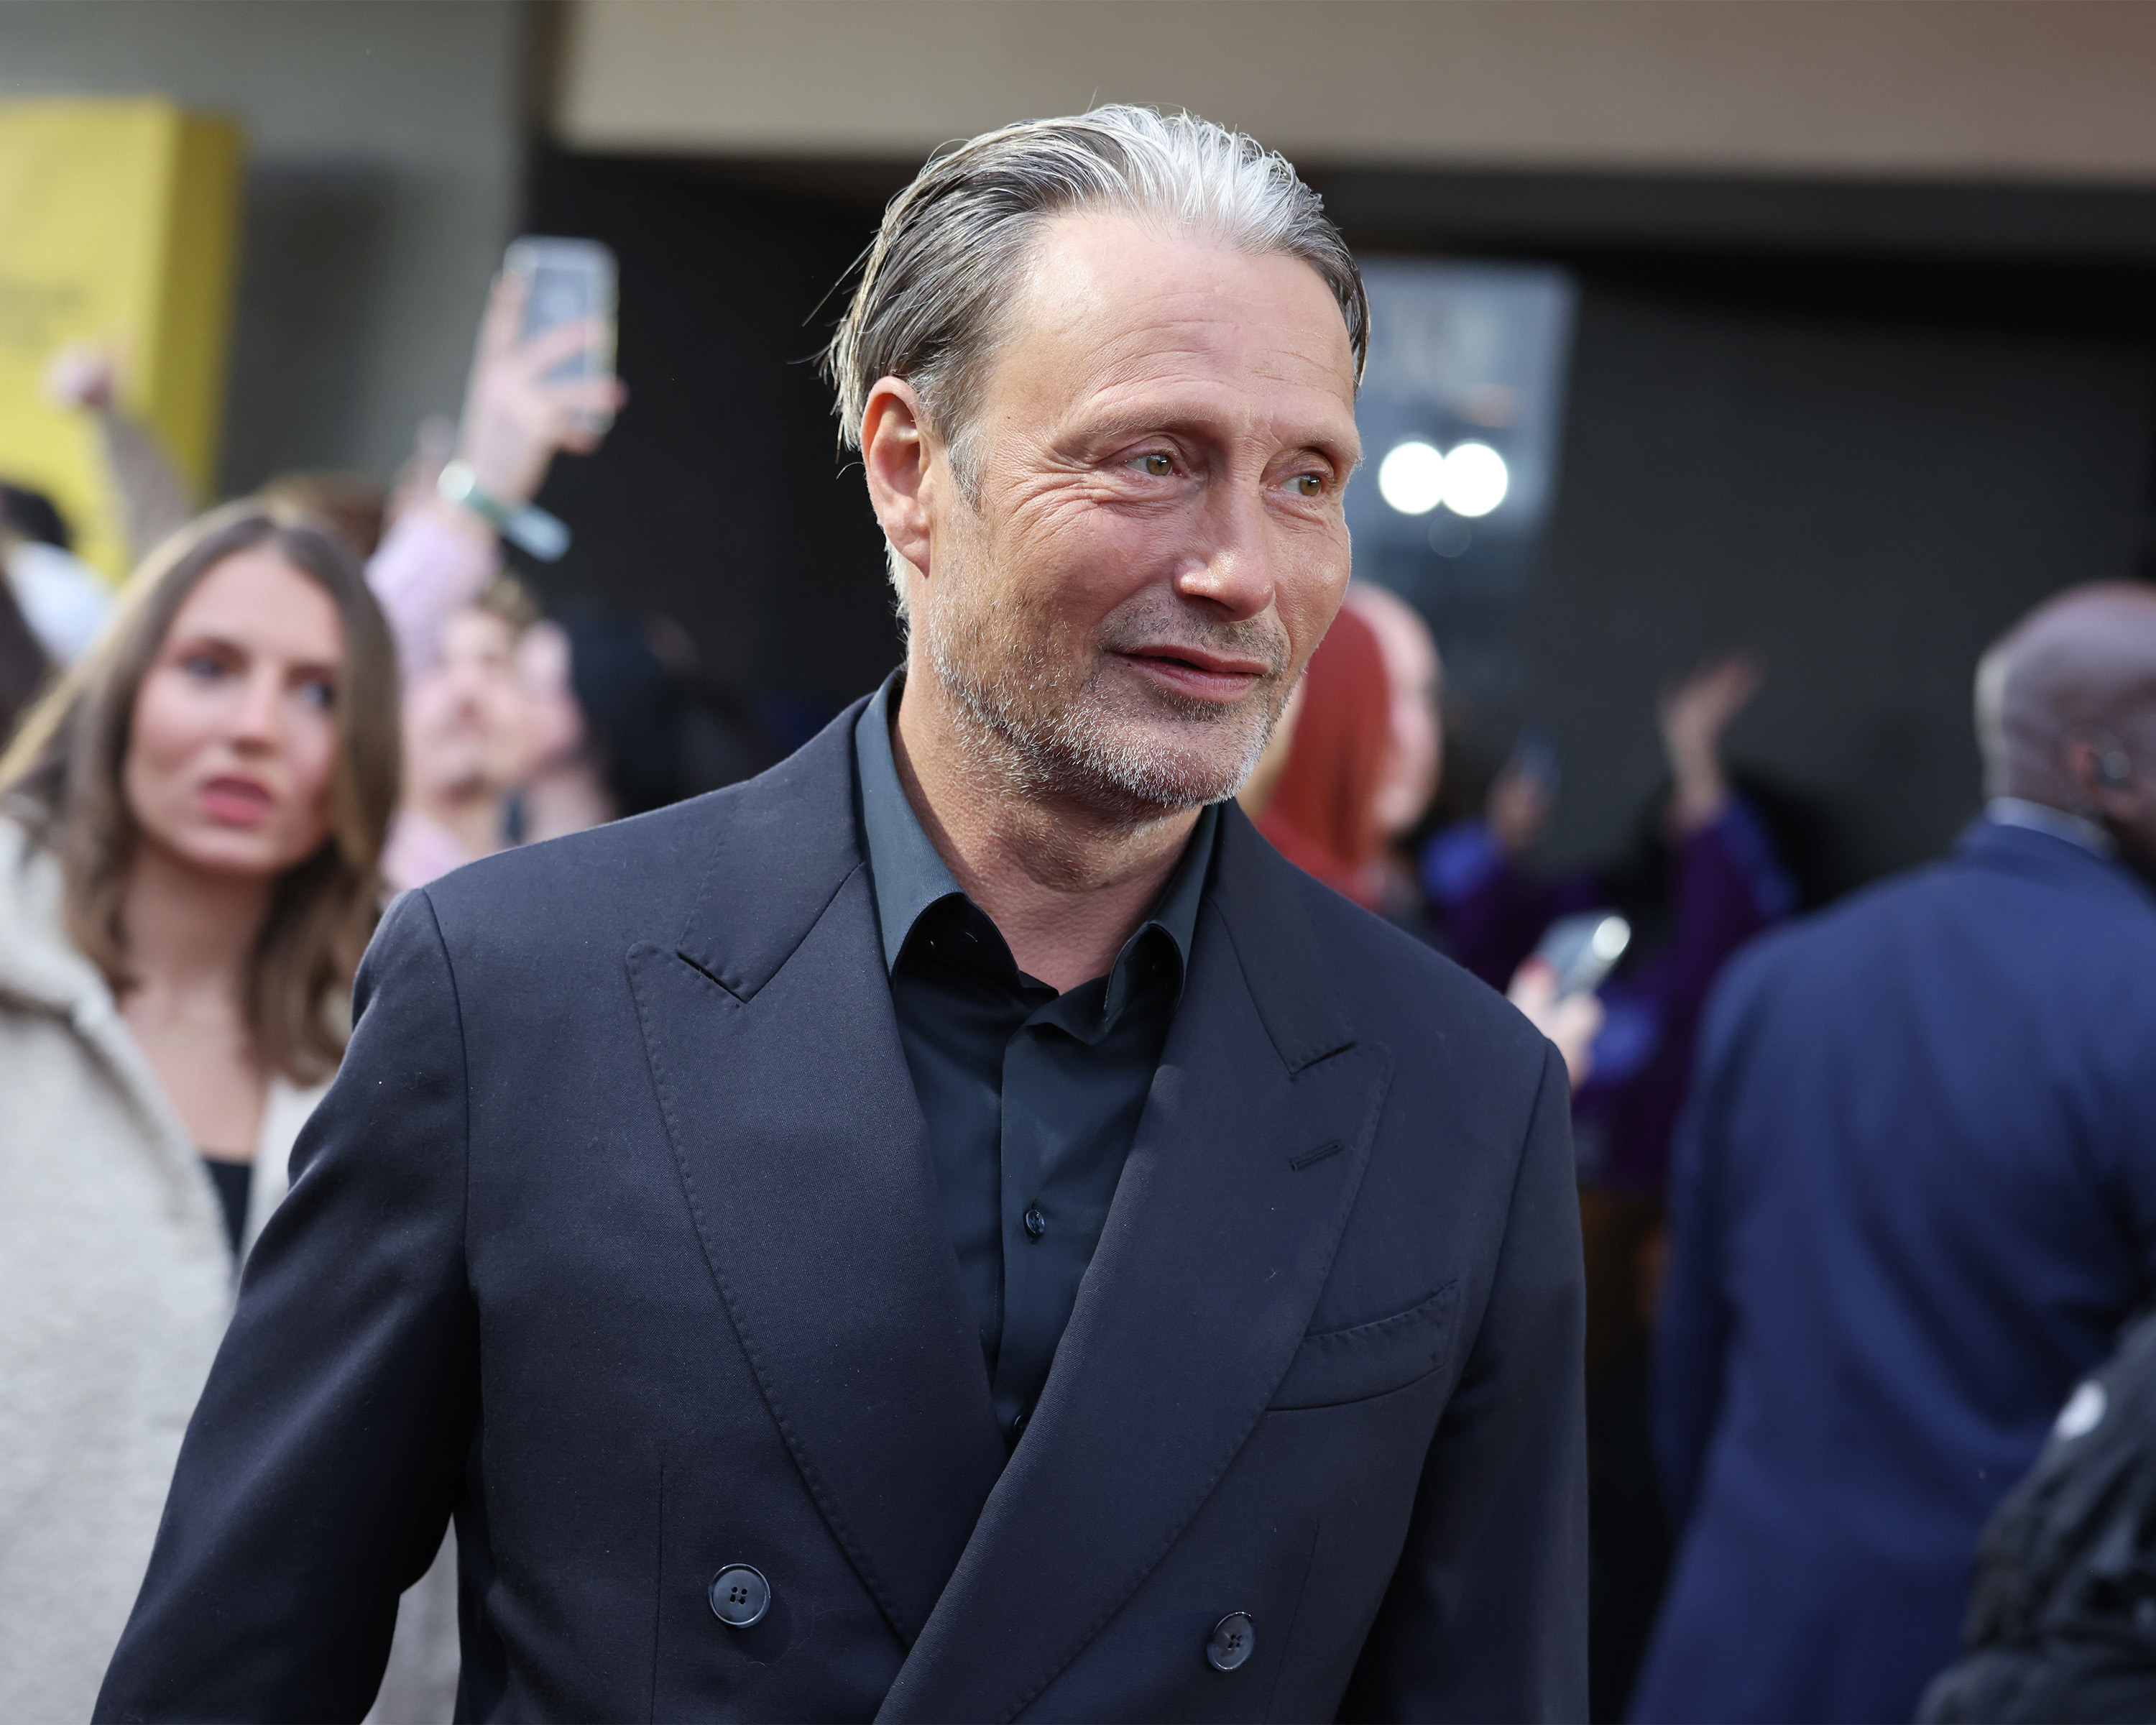 Mads smiles while wearing a suit at an event